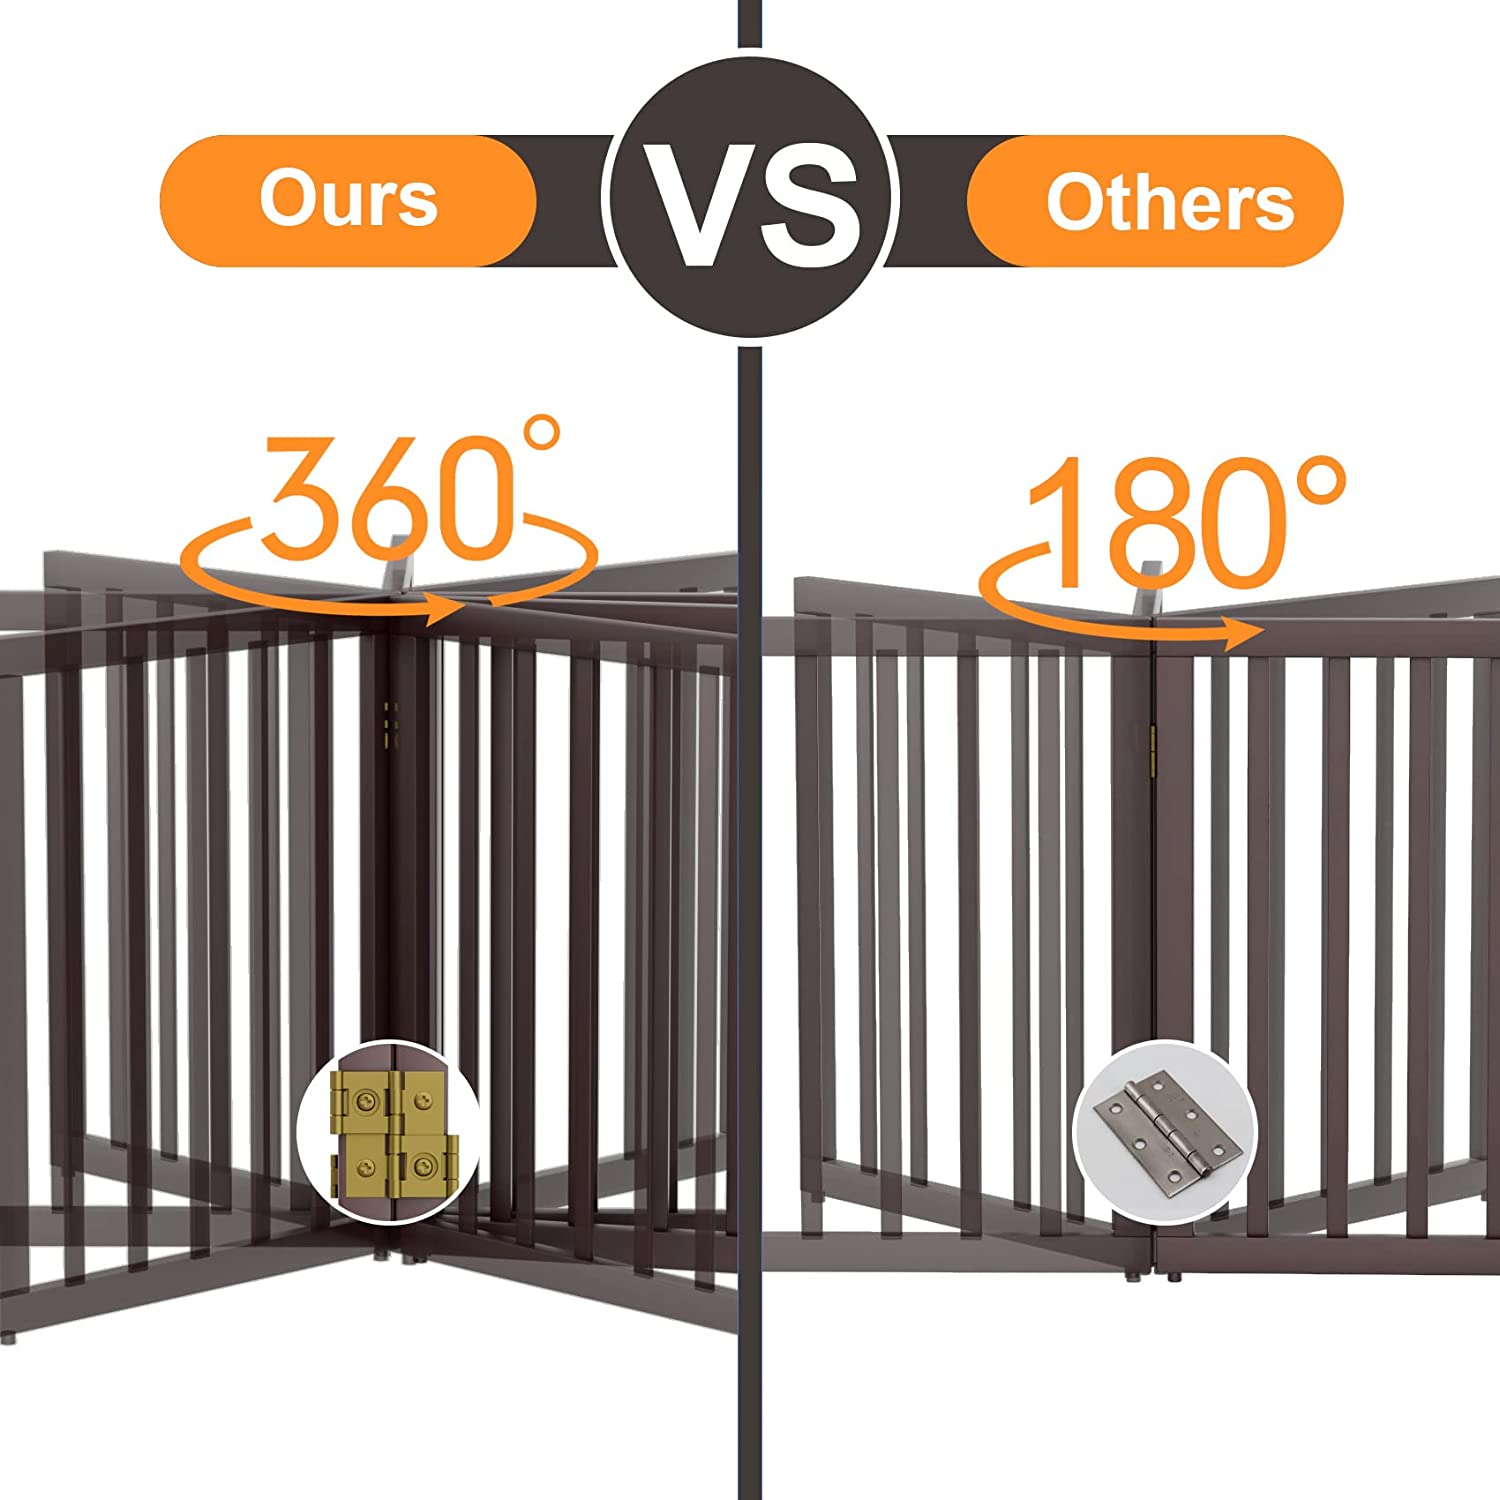 Semiocthome Foldable Wood Extra Wide Baby Gate for Baby，Pet Gates，24